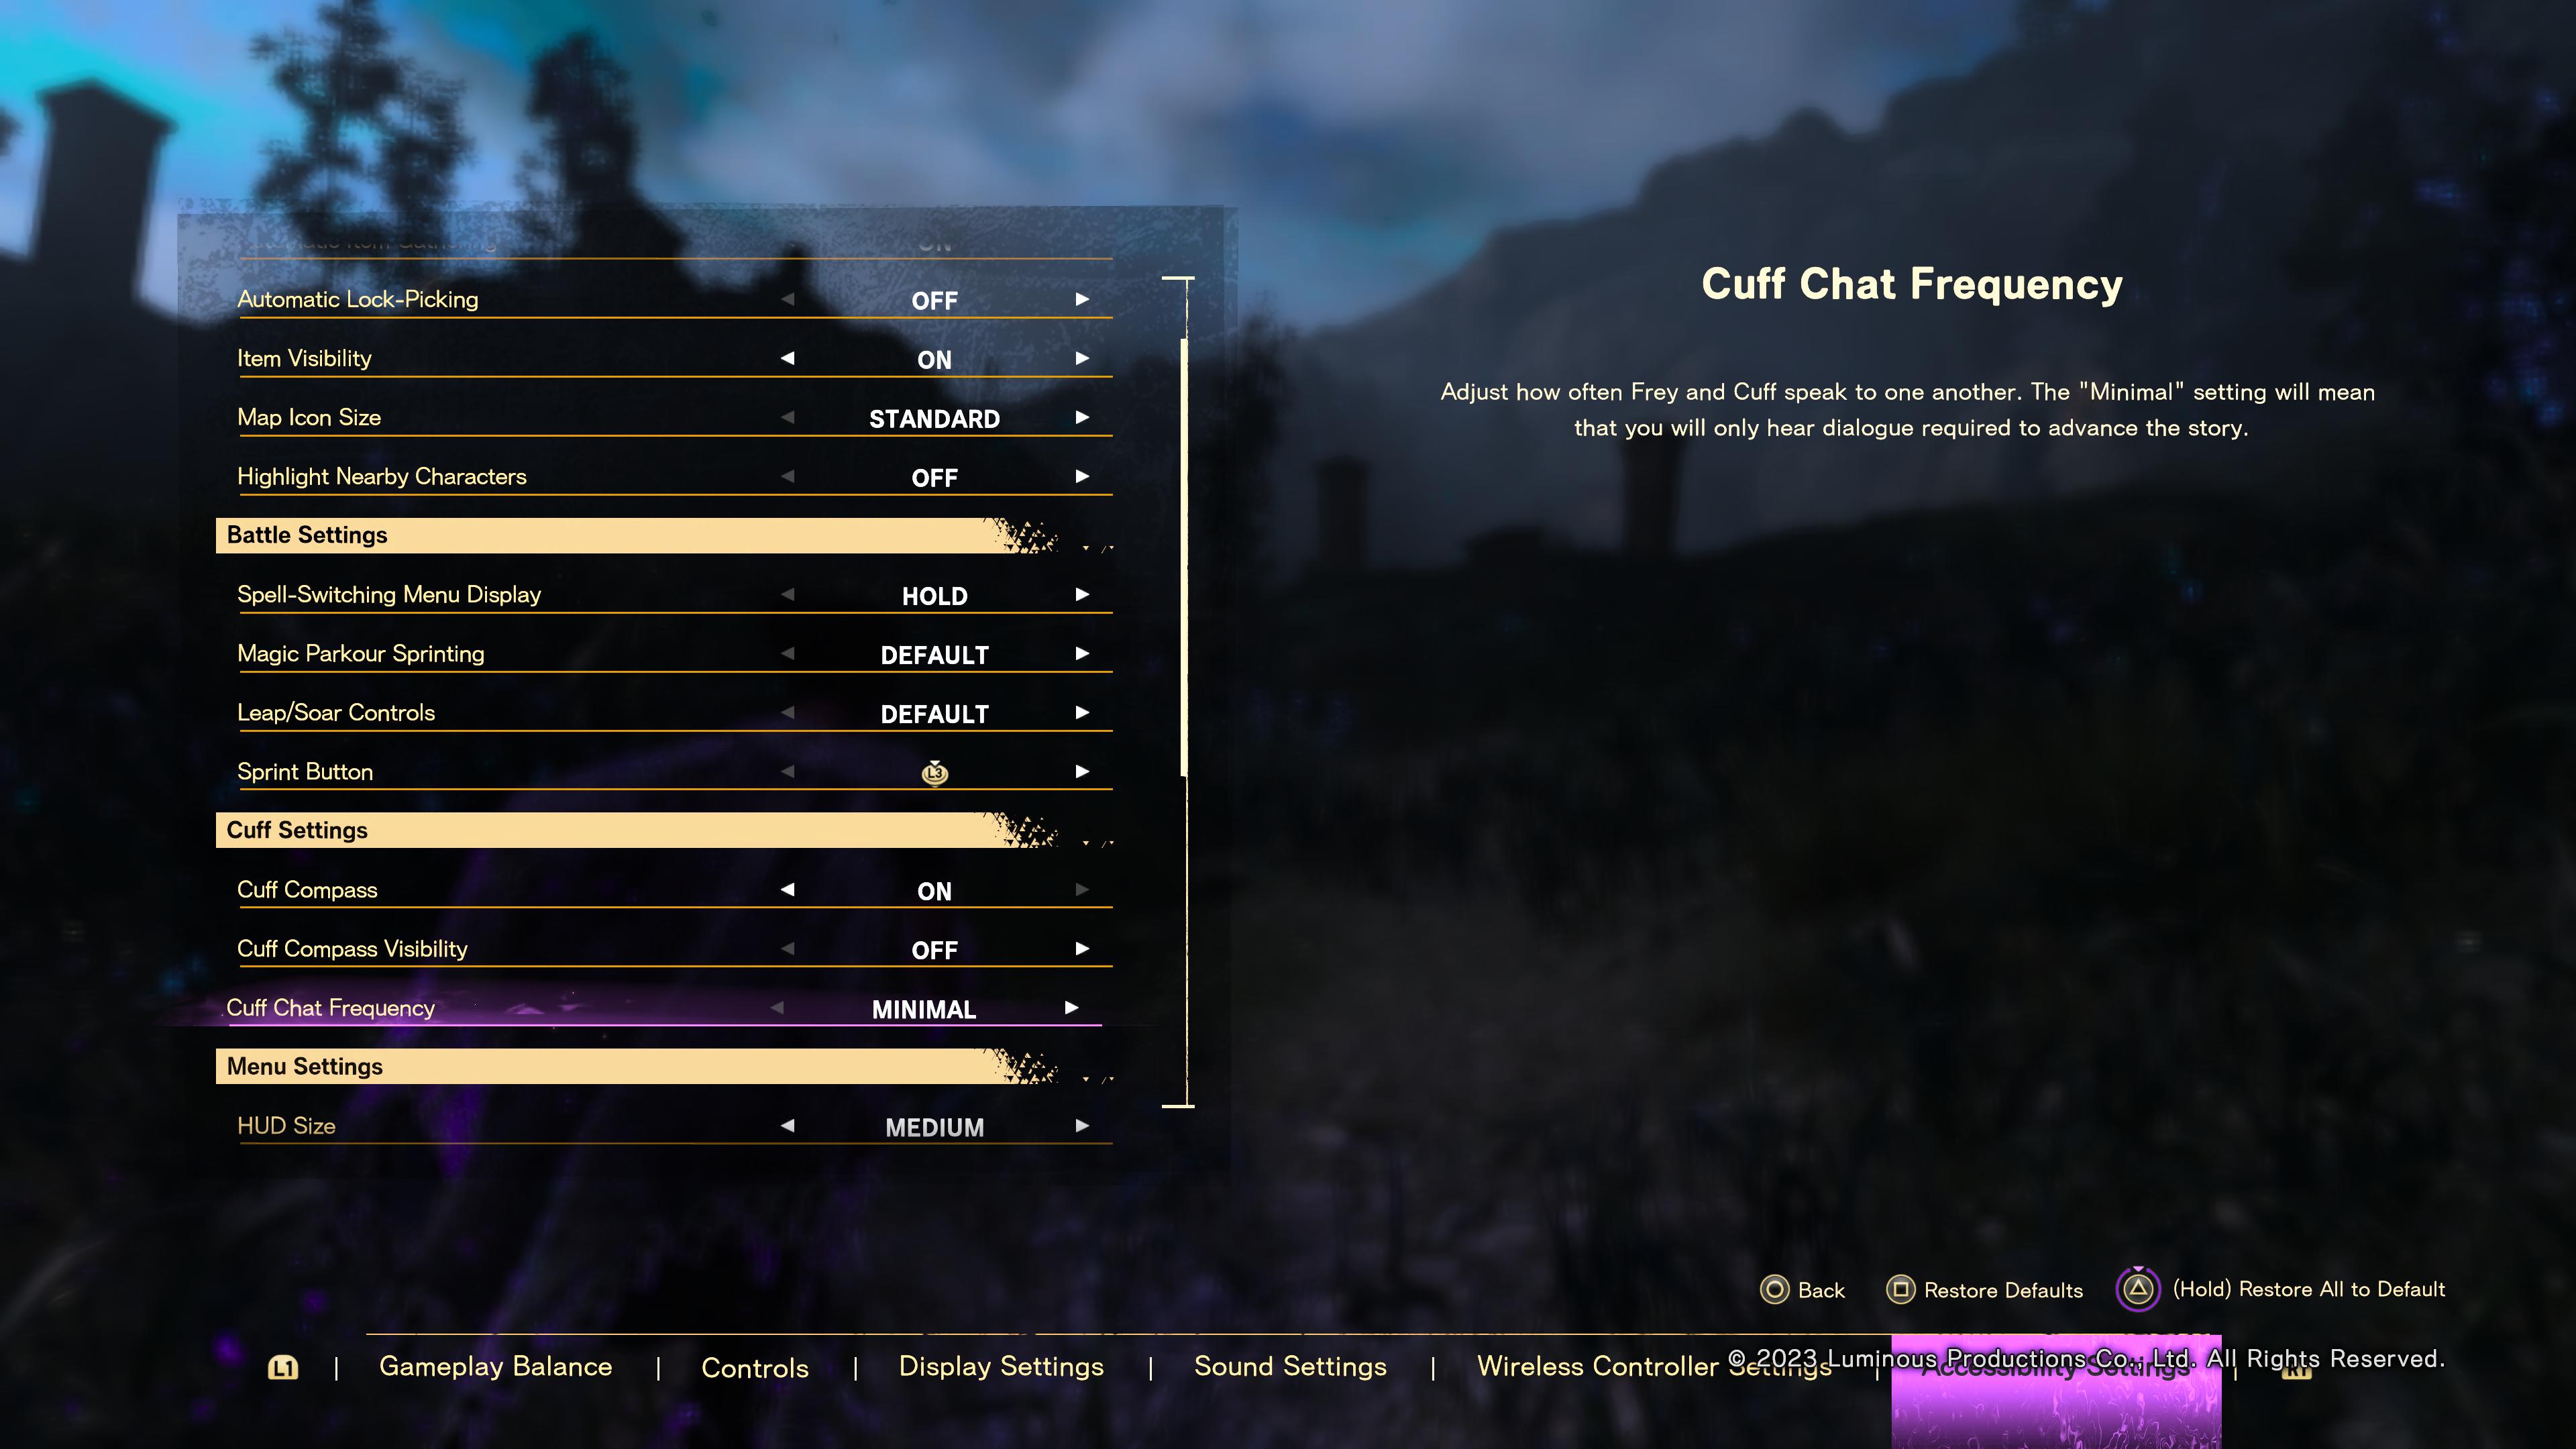 "Adjust how often Frey and Cuff speak to one another," Forspoken's Cuff Chat Frequency description says. "The 'minimal' setting will mean that you will only hear dialogue required to advance the story."